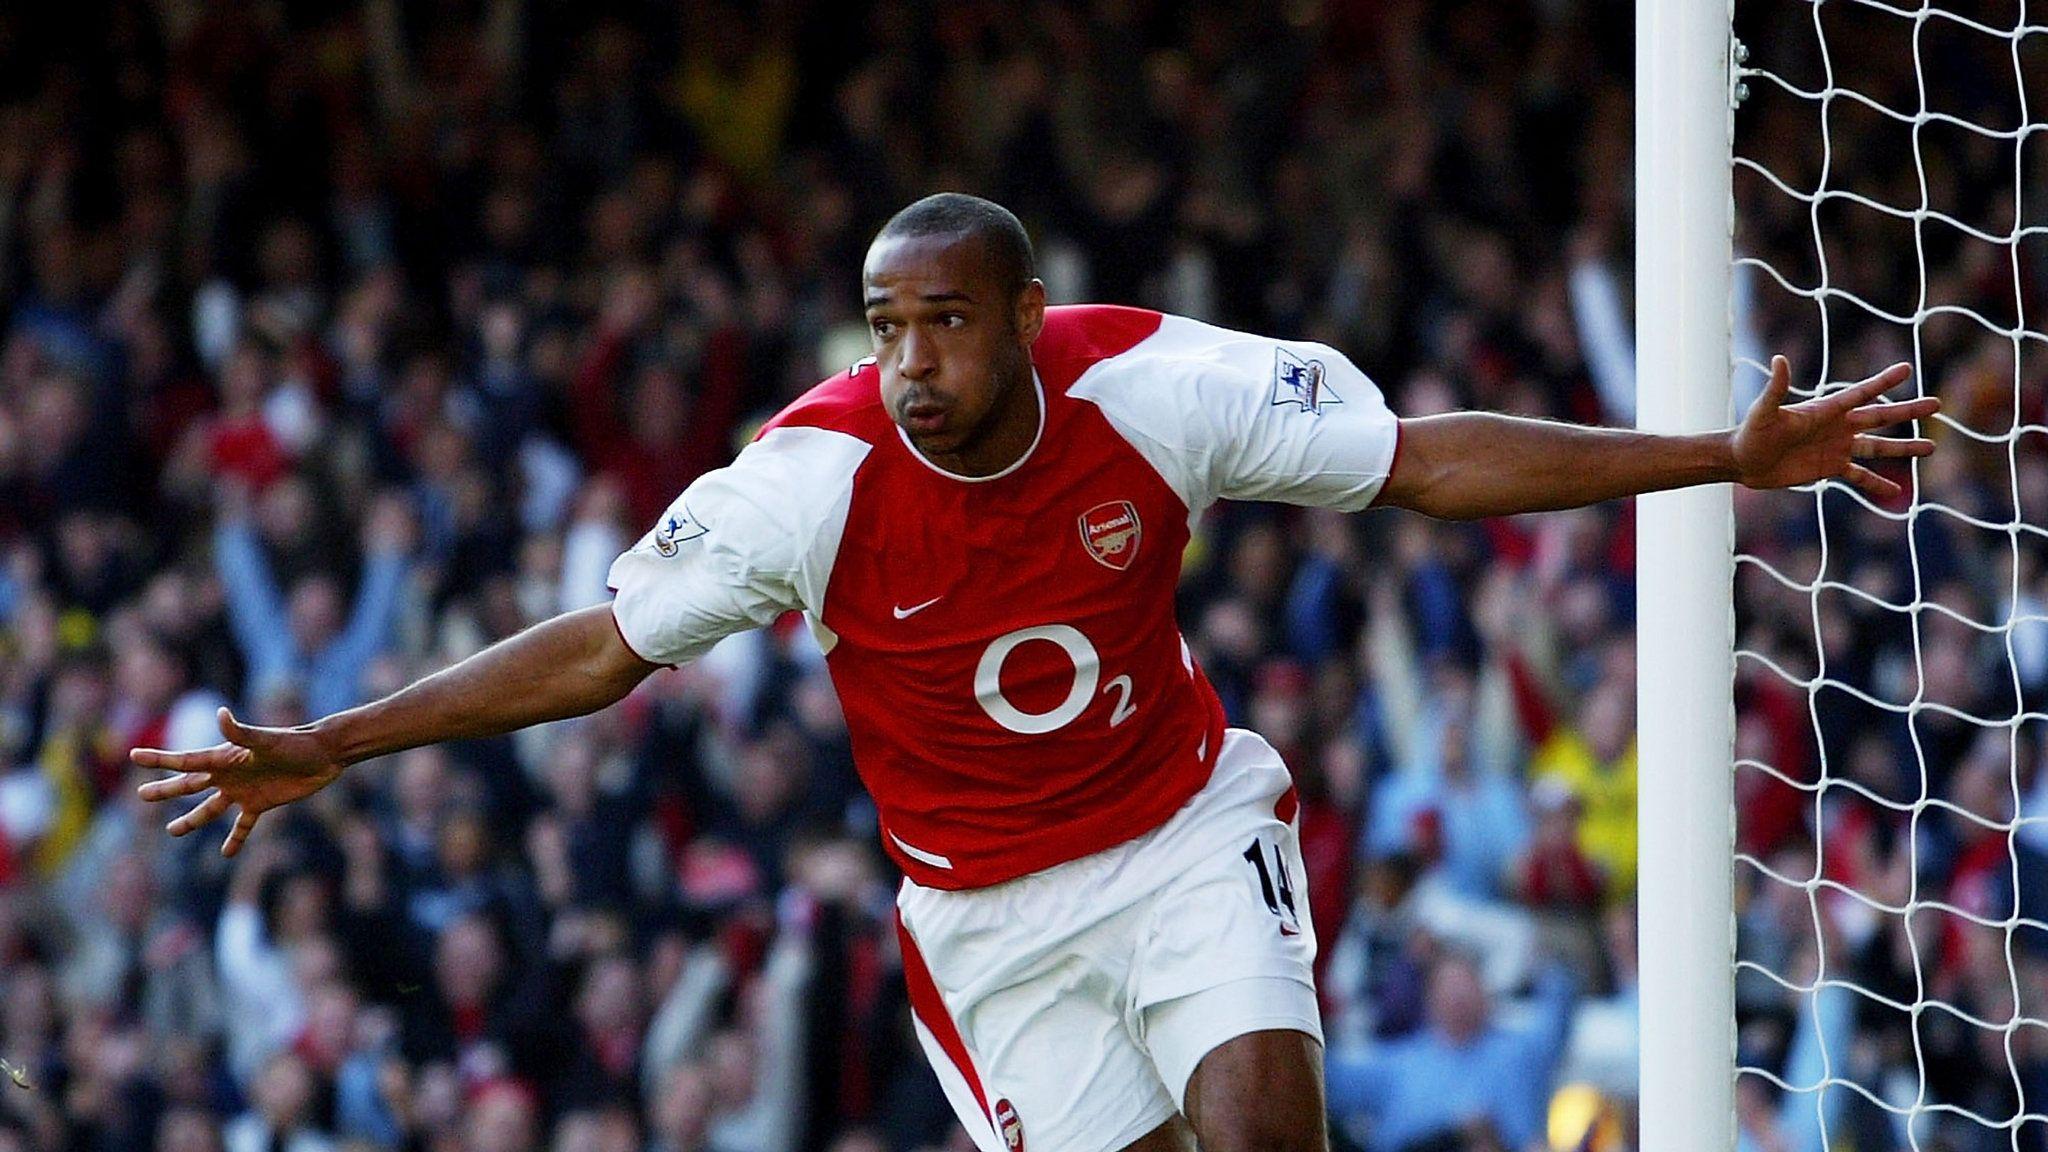 Thierry Henry wants youngsters to believe they are capable